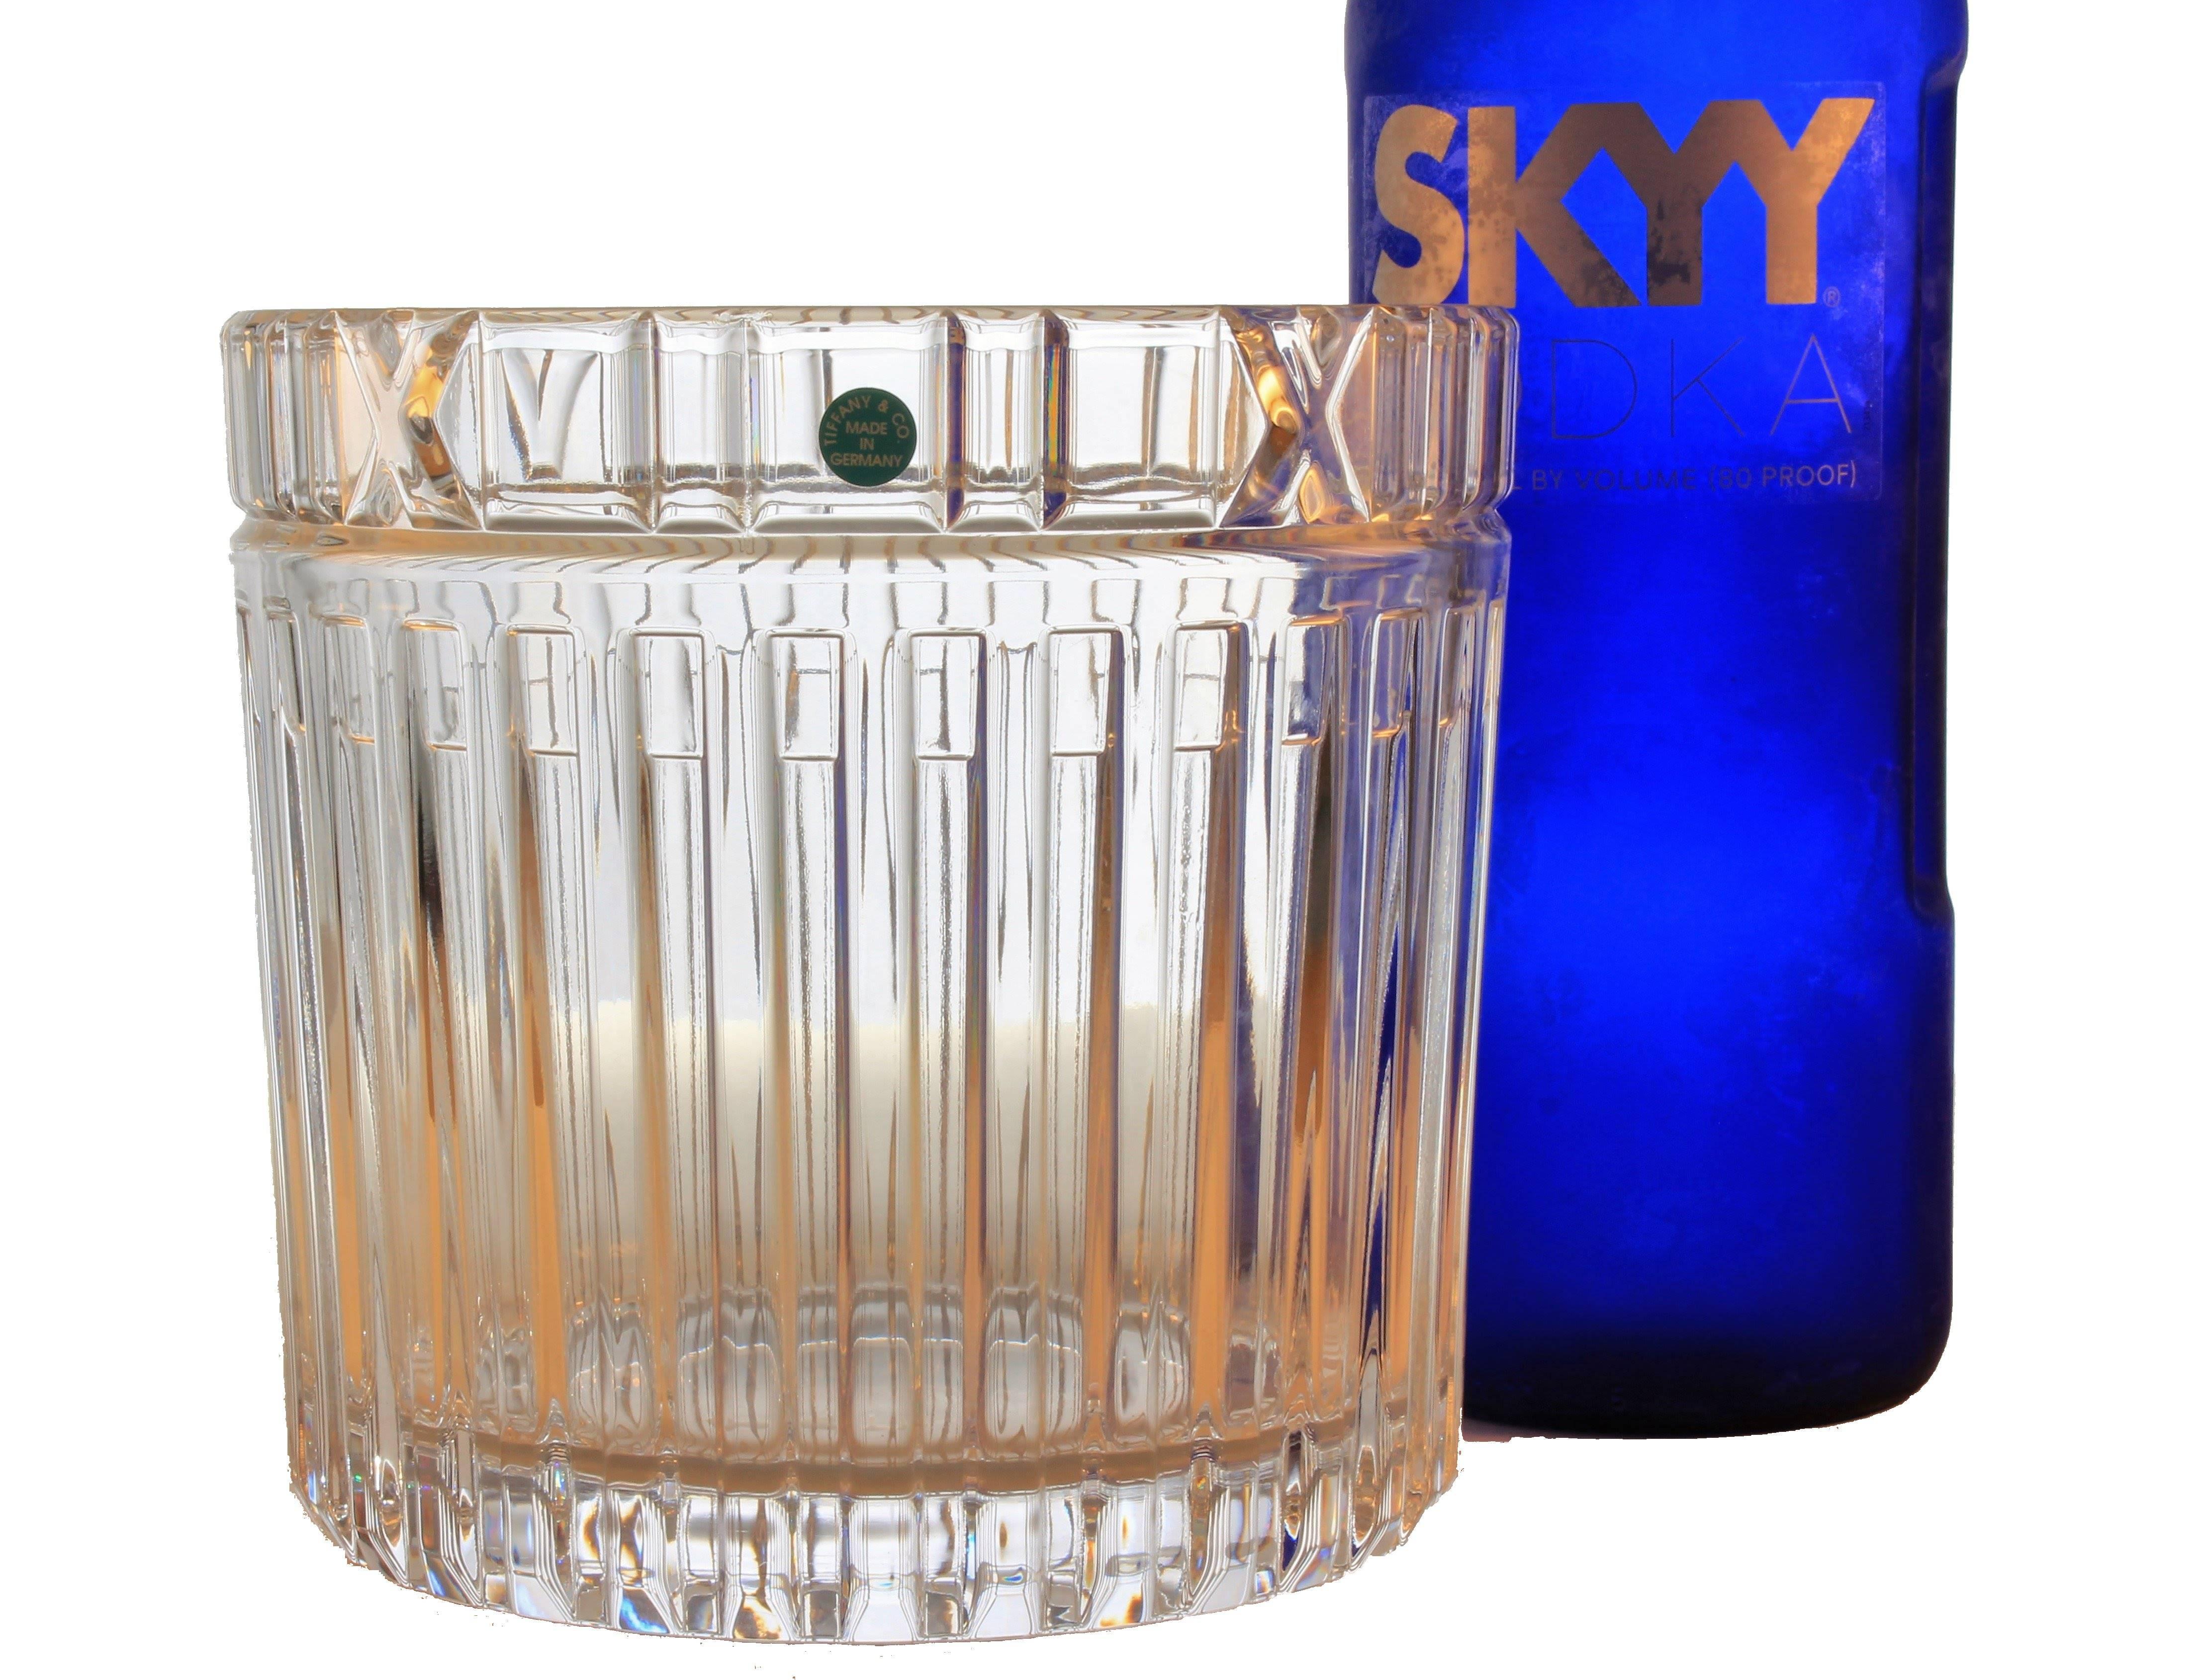 This crystal champagne ice bucket or cooler is from Tiffany & Co., made in the Atlas pattern, which features a Roman numeral motif along the rim with a linear design on the base. This pattern is named for the Atlas clock that has been above the